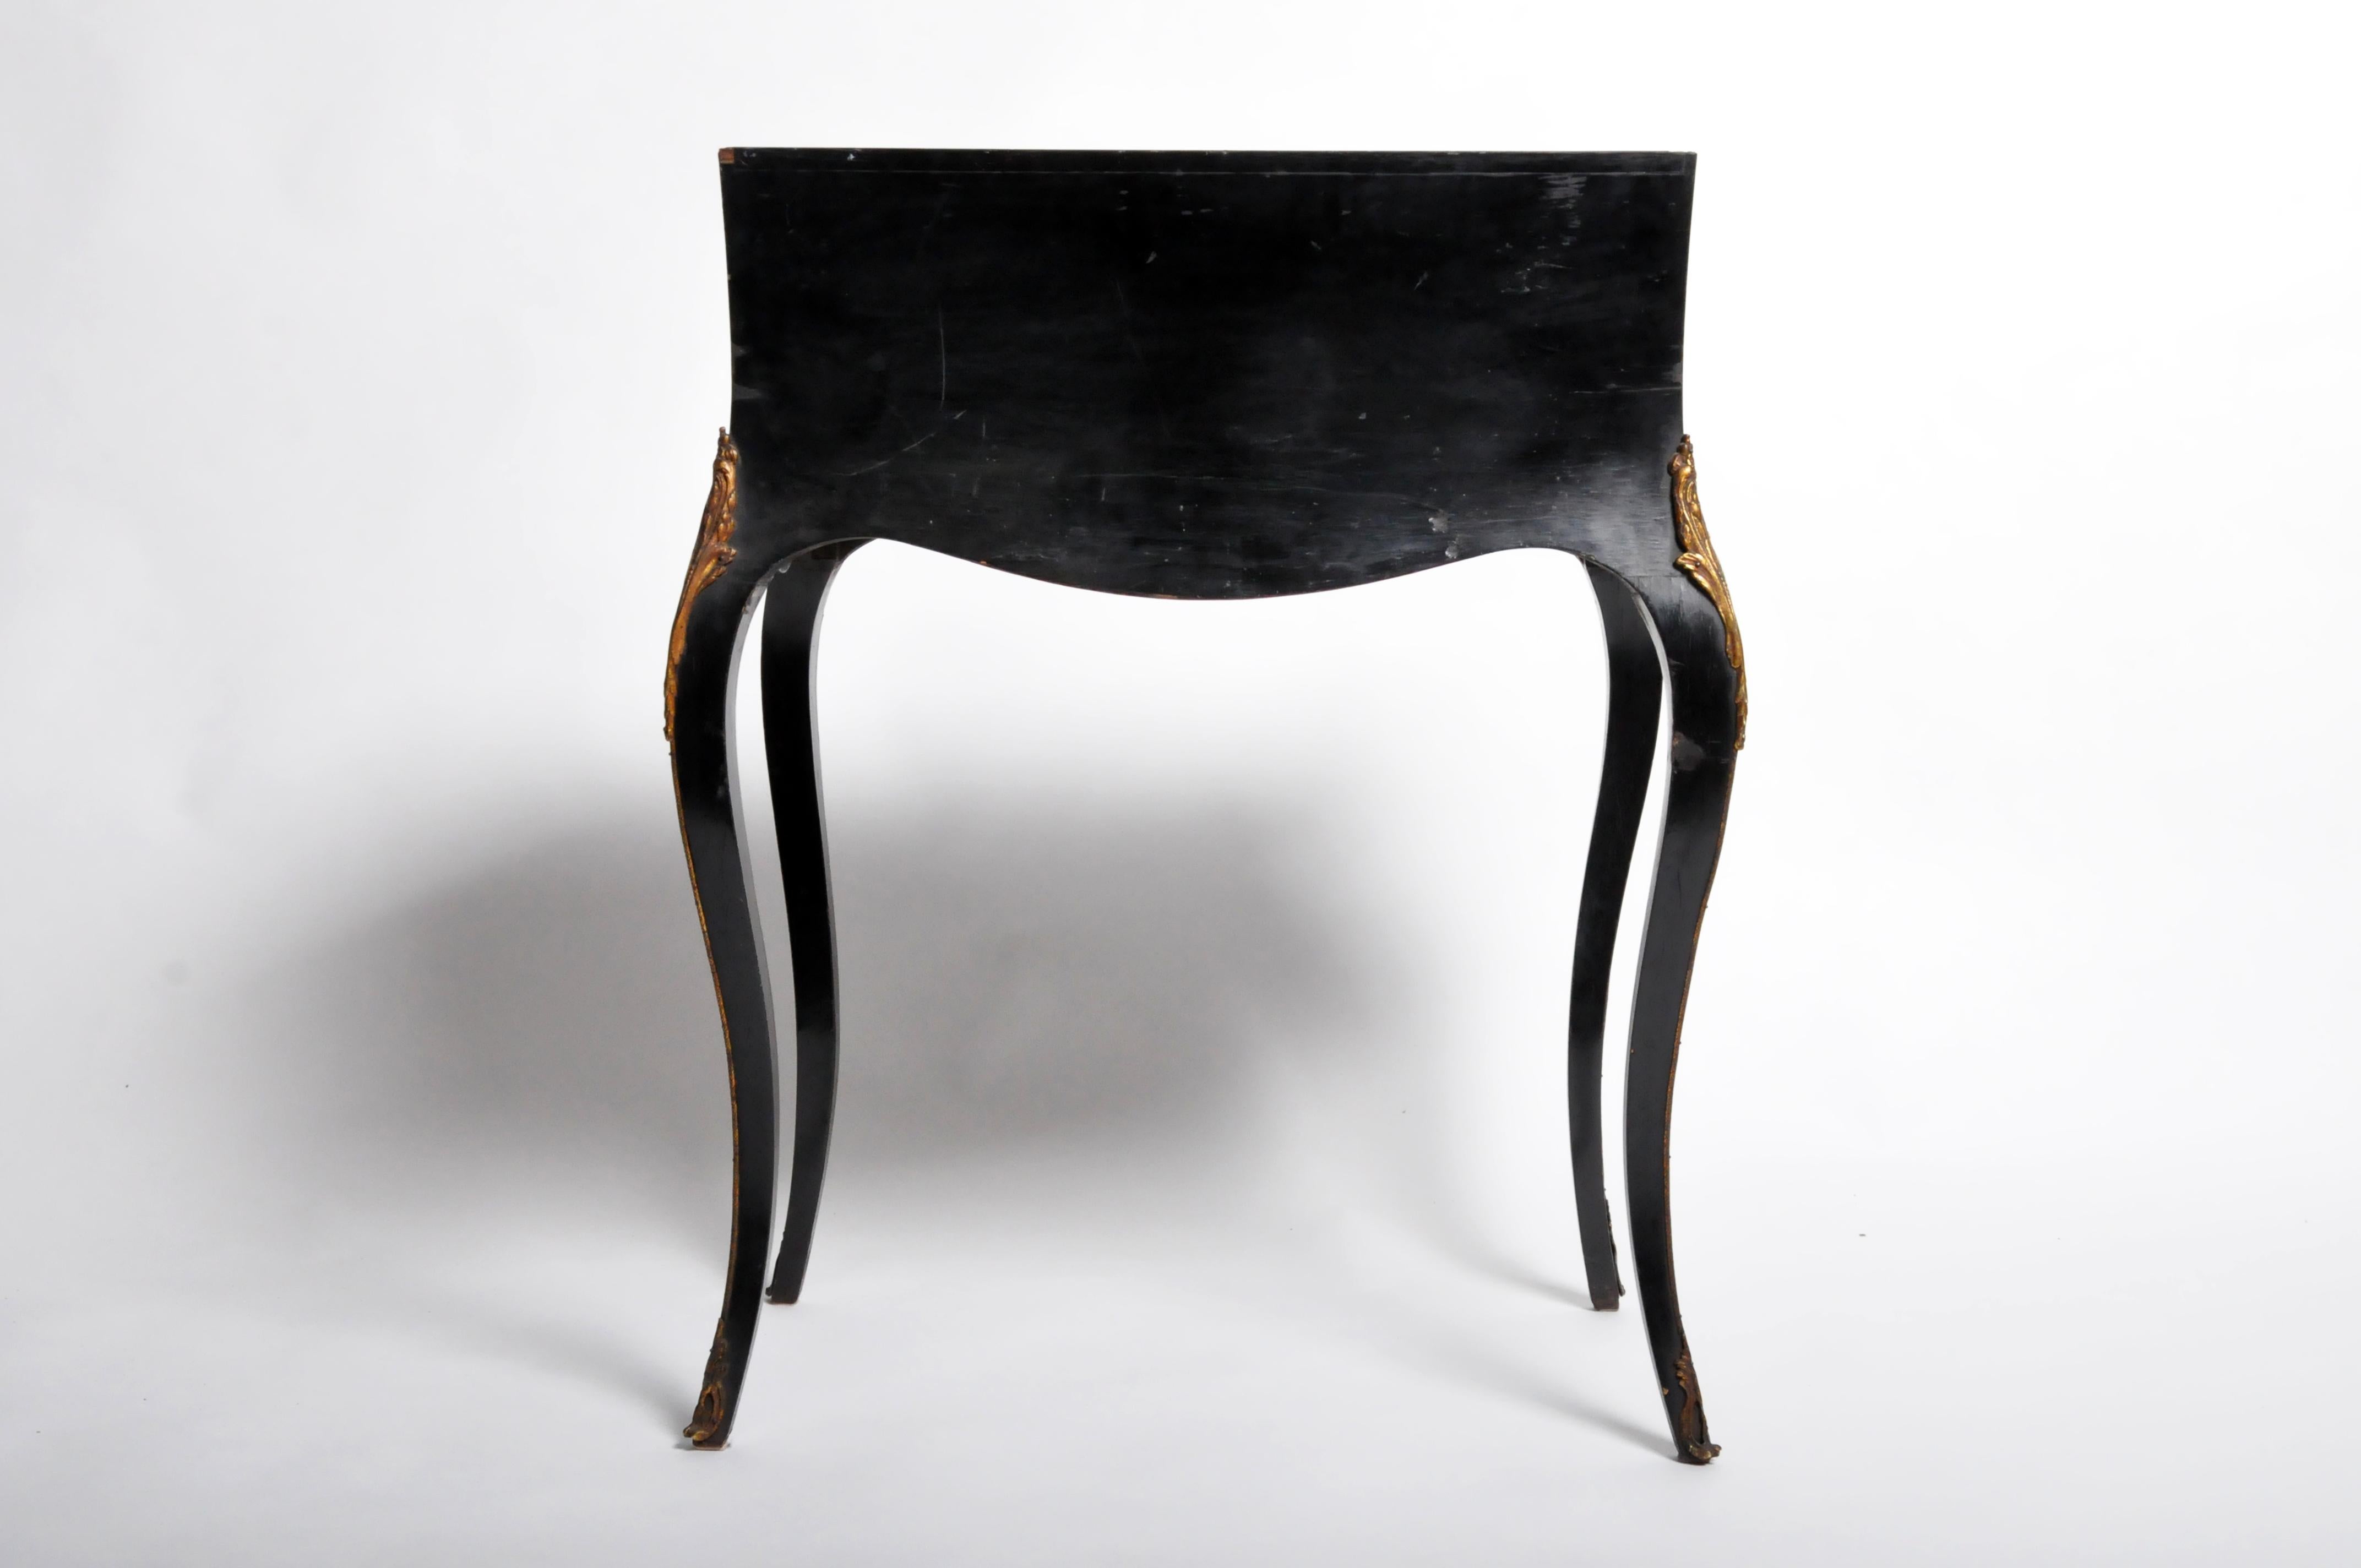 This petit fold-out bureau has many of the best-loved elements of “Second Empire” design – black lacquer, cast, and inlaid brass, and somewhat sensual curves. The piece is made from hardwood, veneered and lacquered black. Interior drawers are